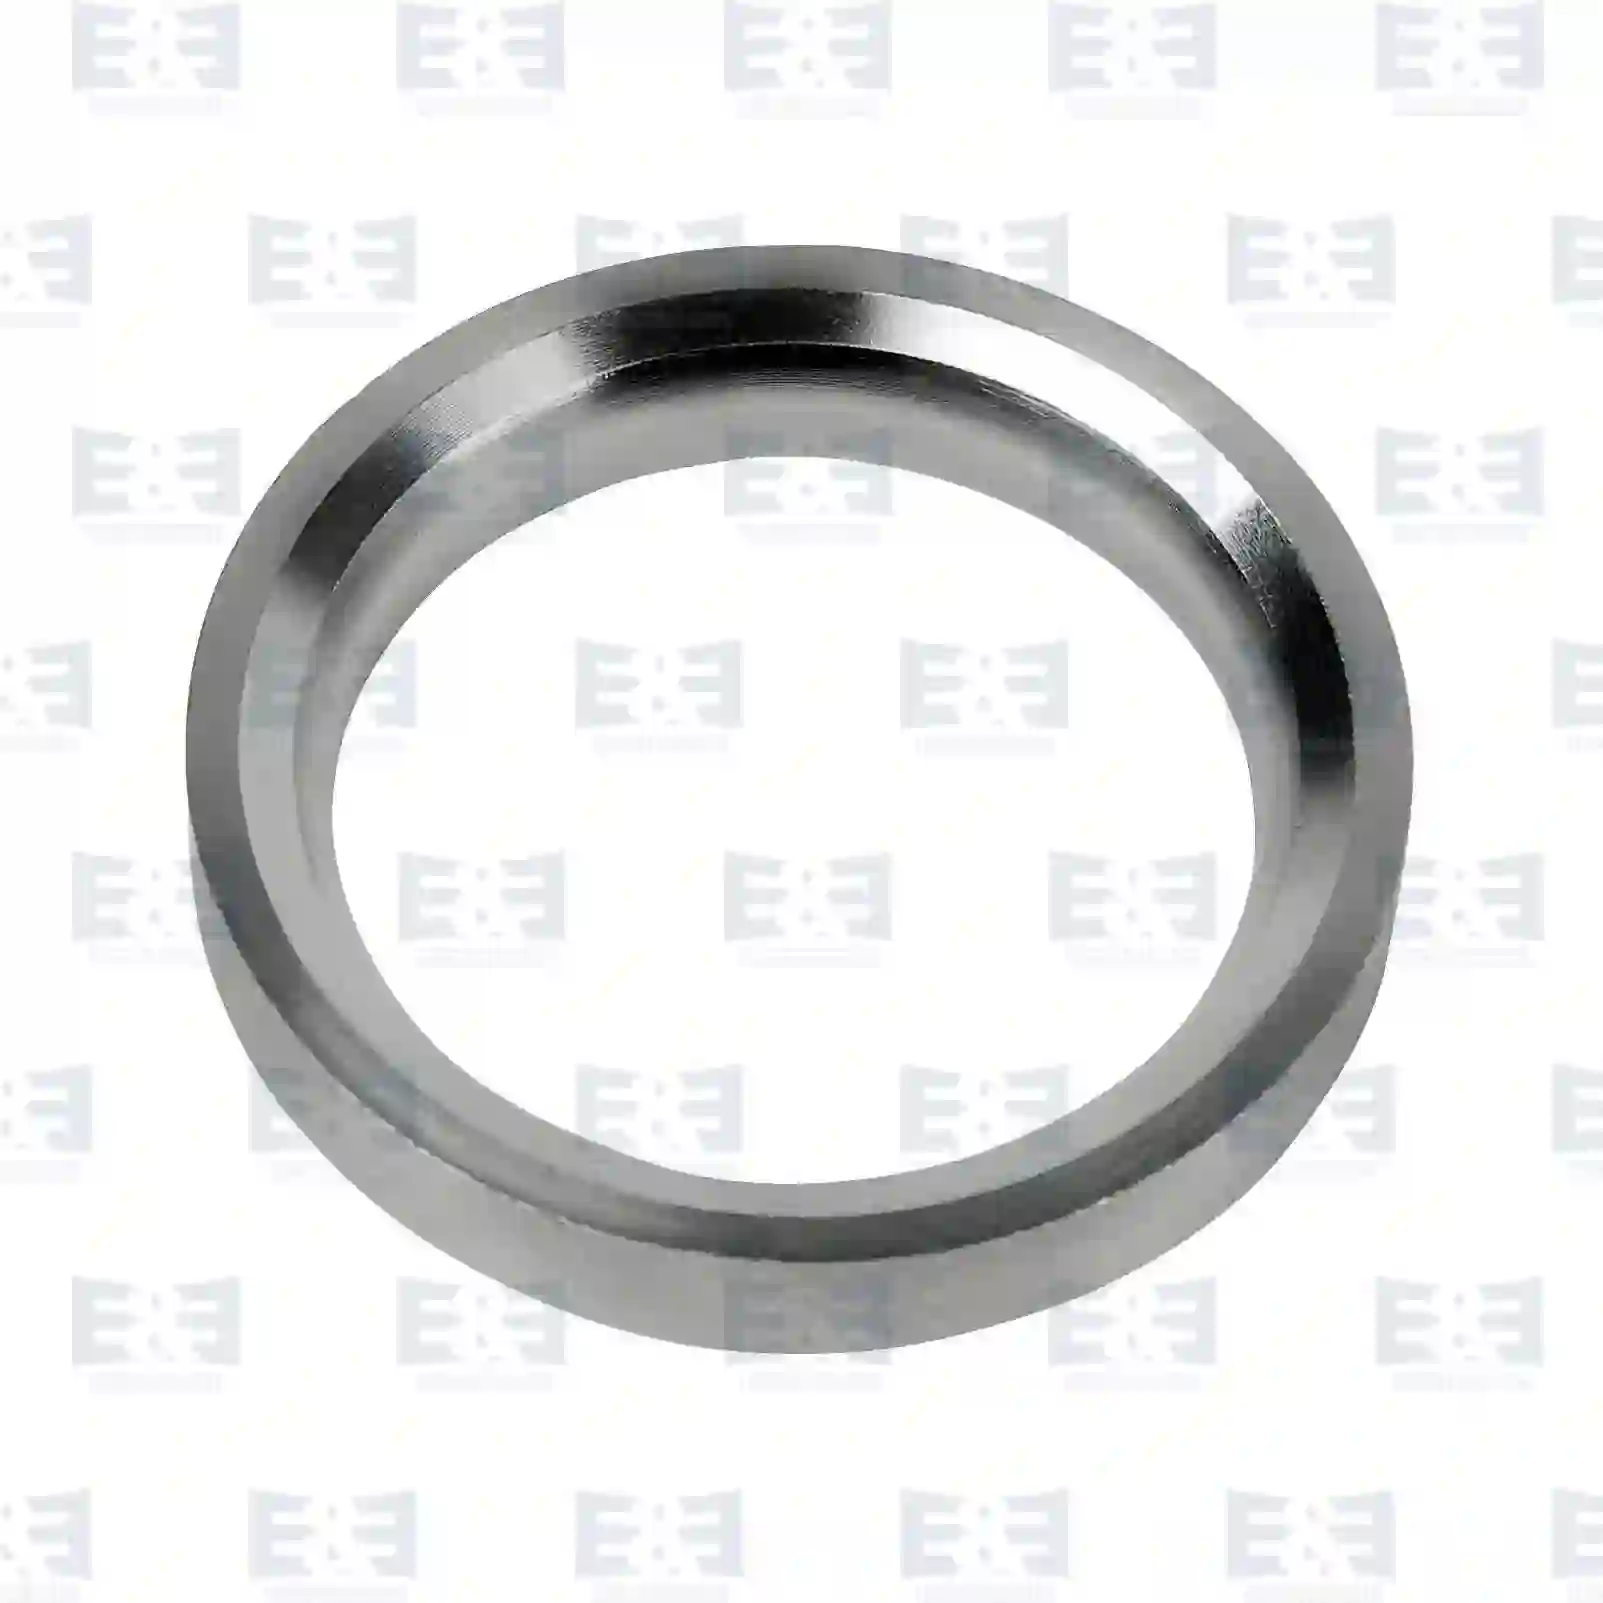  Cylinder Head Valve seat ring, intake, EE No 2E2206954 ,  oem no:7420561997, 20561997, ZG02290-0008, , E&E Truck Spare Parts | Truck Spare Parts, Auotomotive Spare Parts